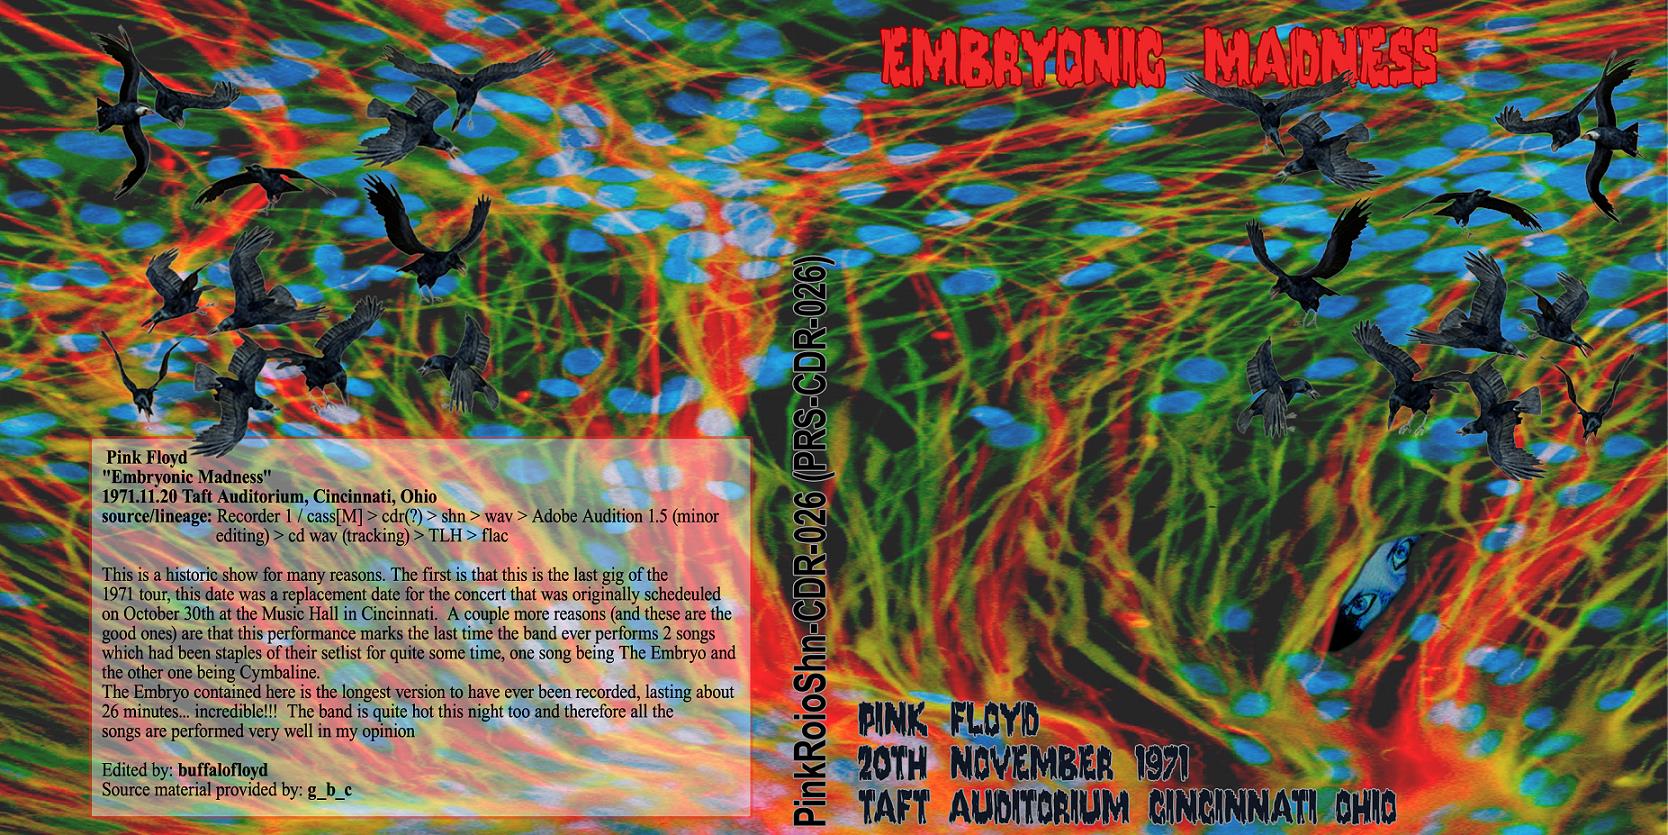 1971-11-20-Embryonic_Madness-front